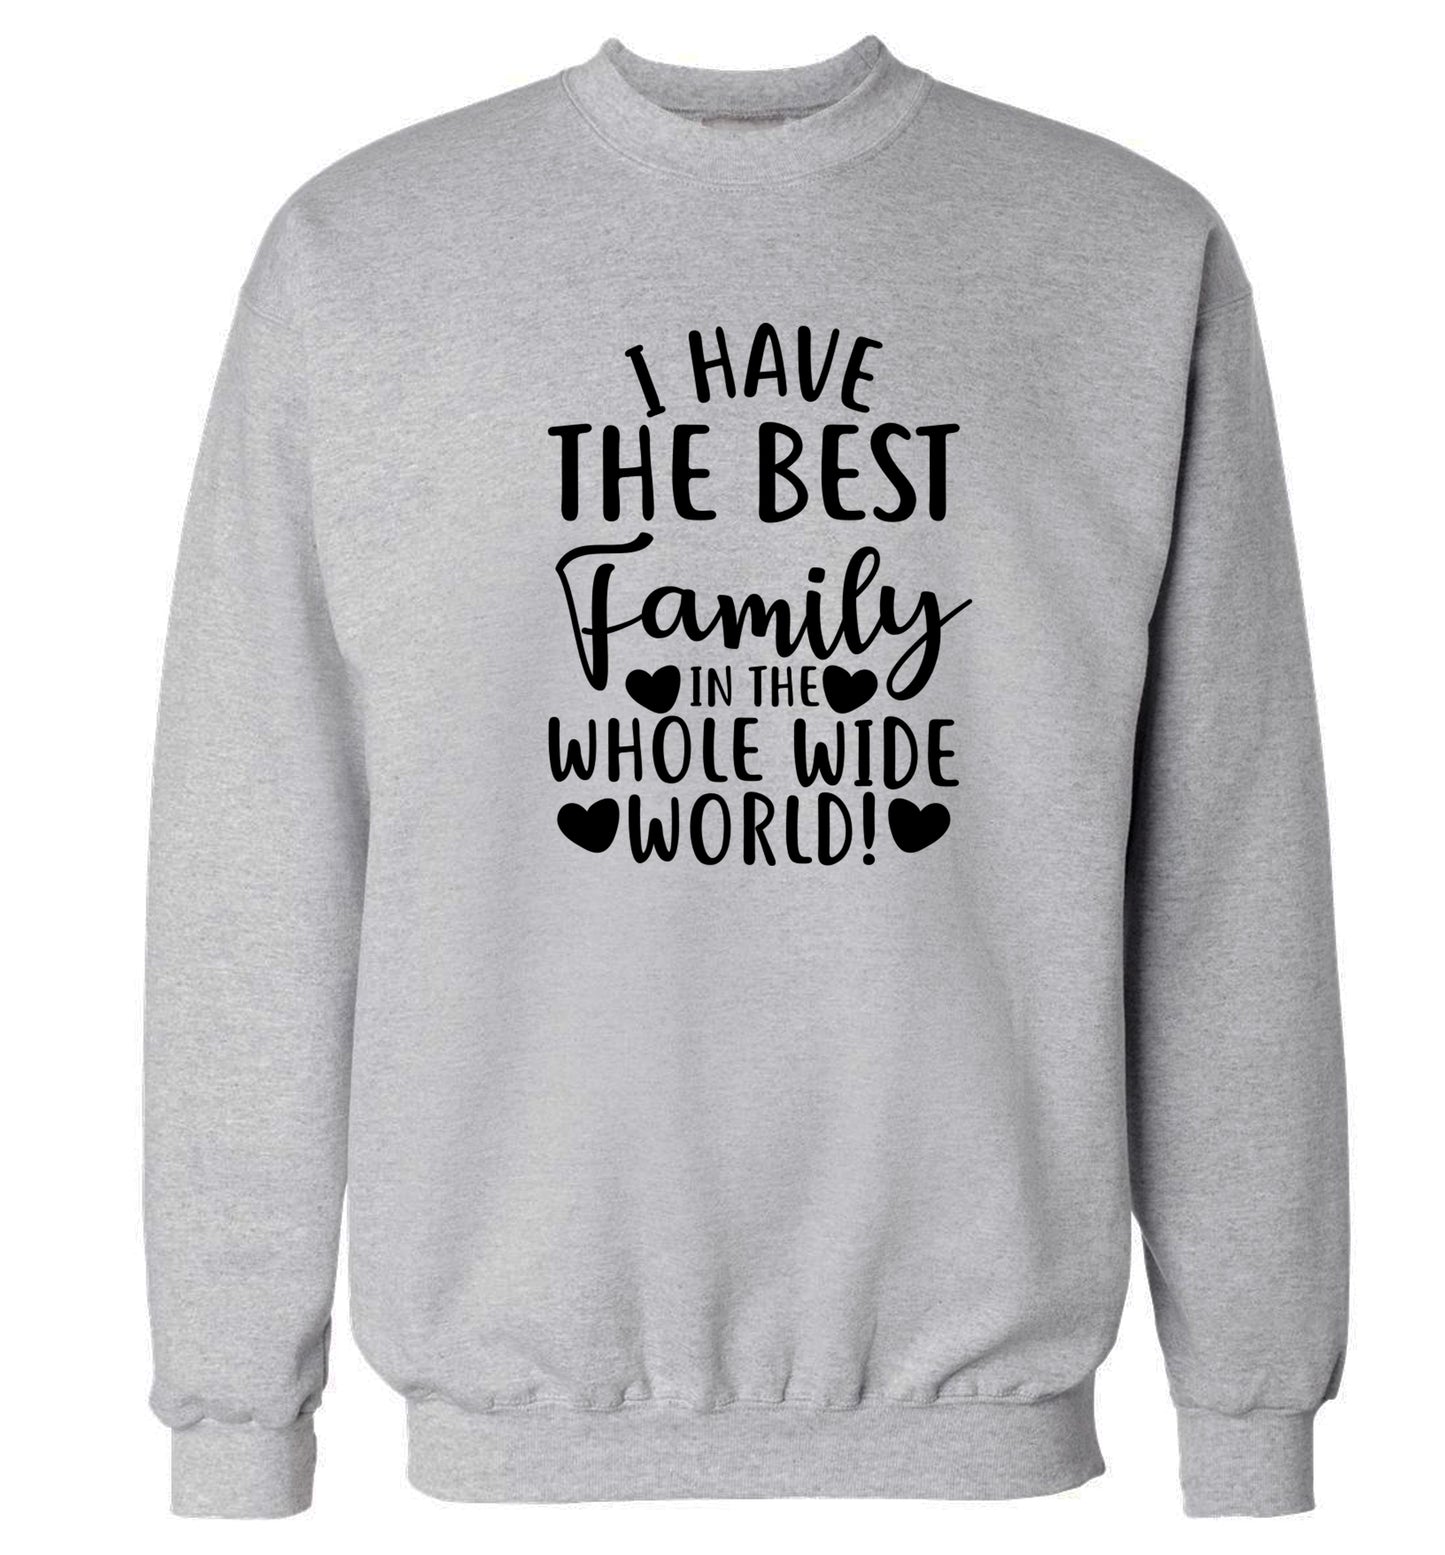 I have the best family in the whole wide world! Adult's unisex grey Sweater 2XL